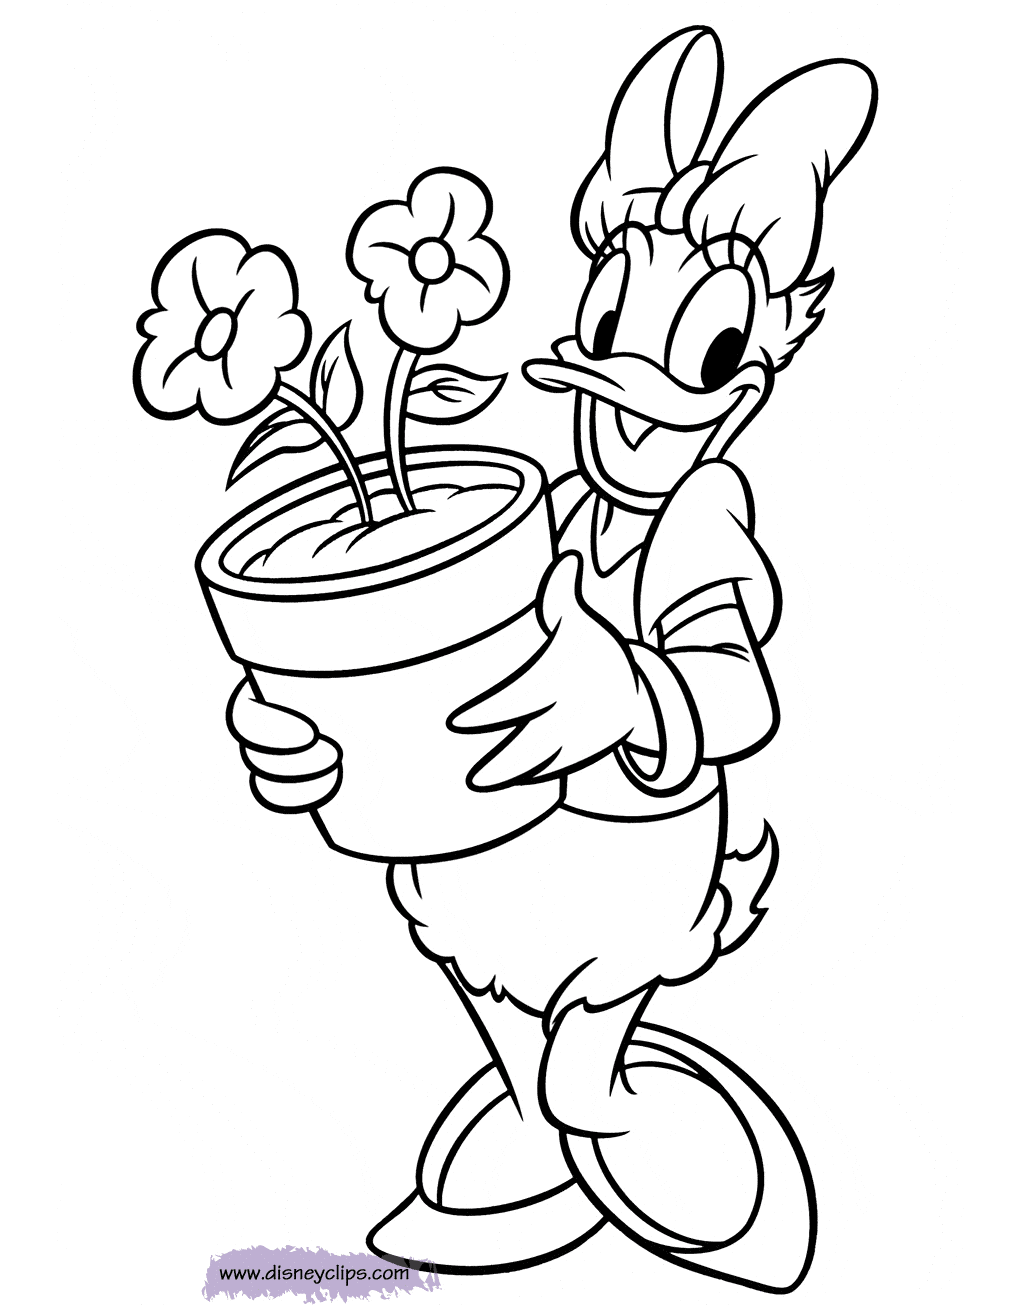 Daisy Duck Coloring Pages (3) | Disneyclips.com